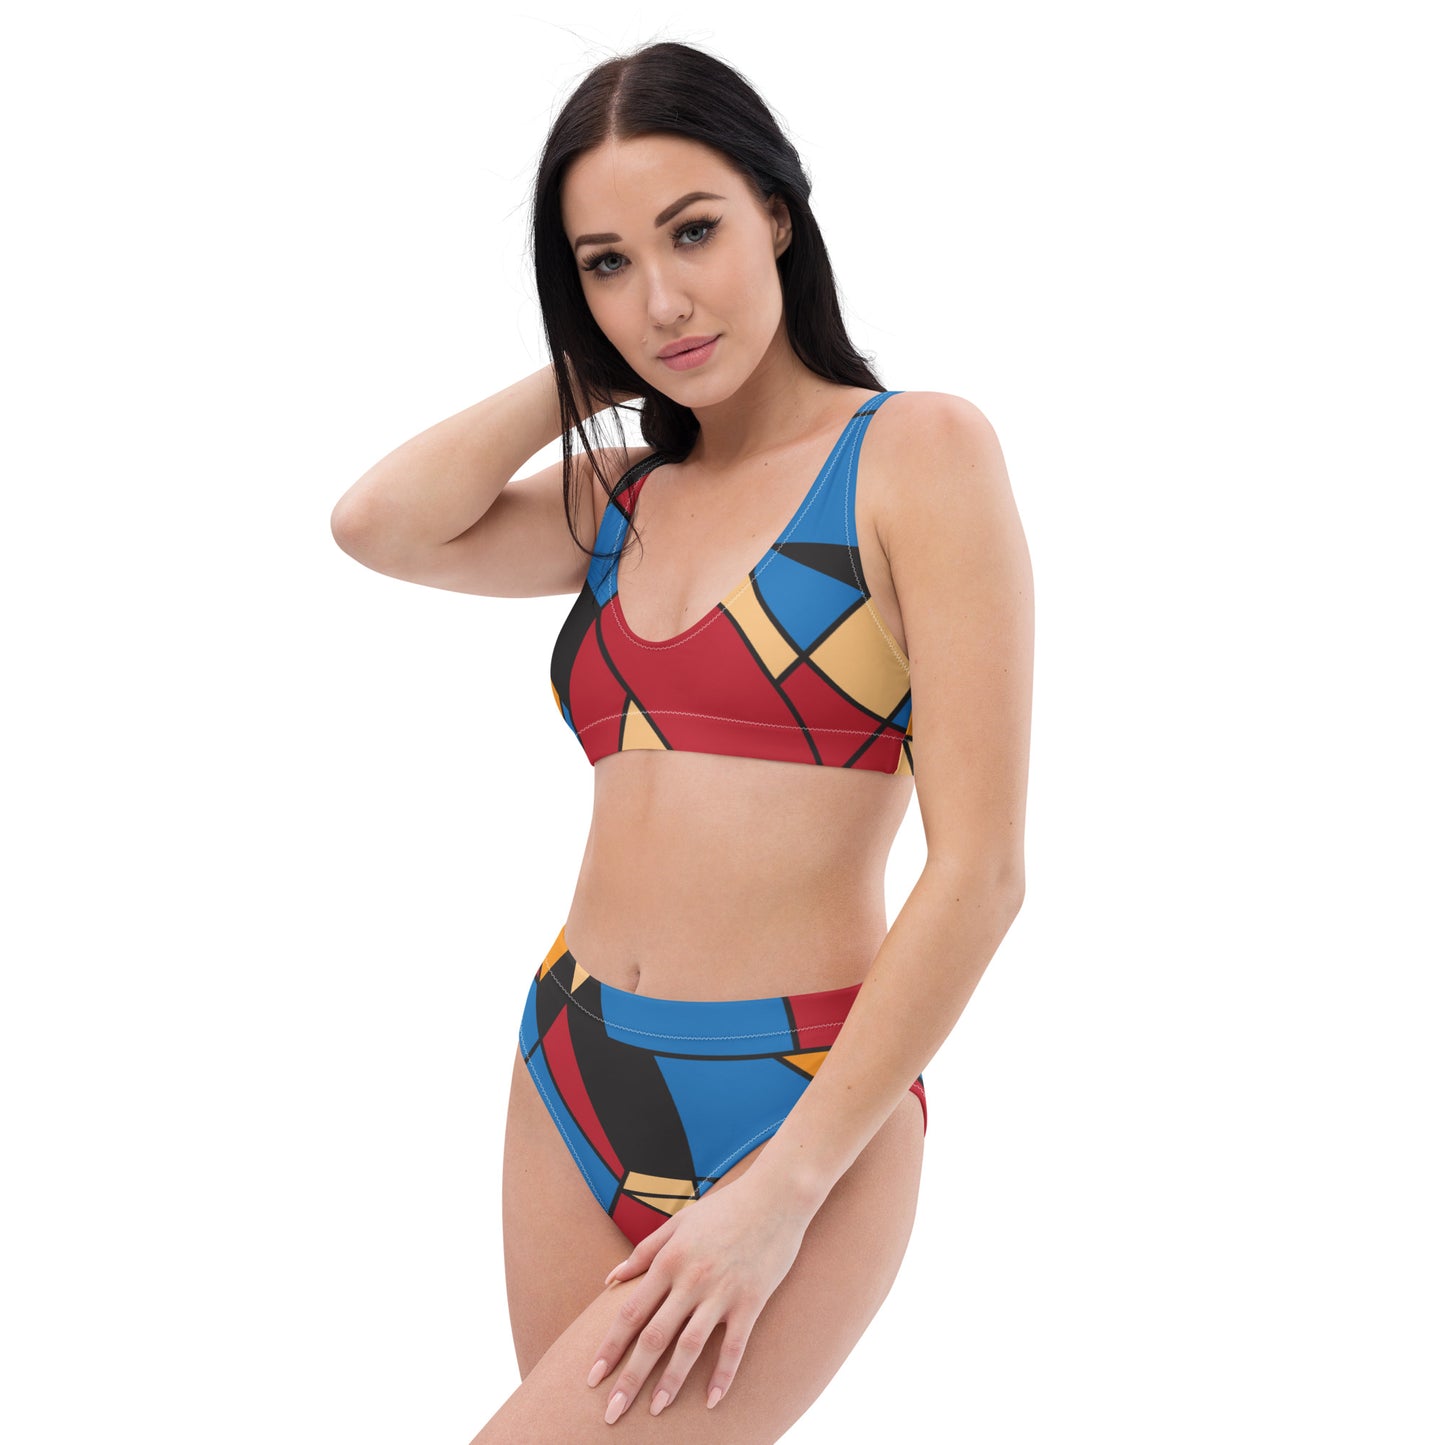 Recycled high-waisted bikini with Mondrian design sourced by Vecteezy.com